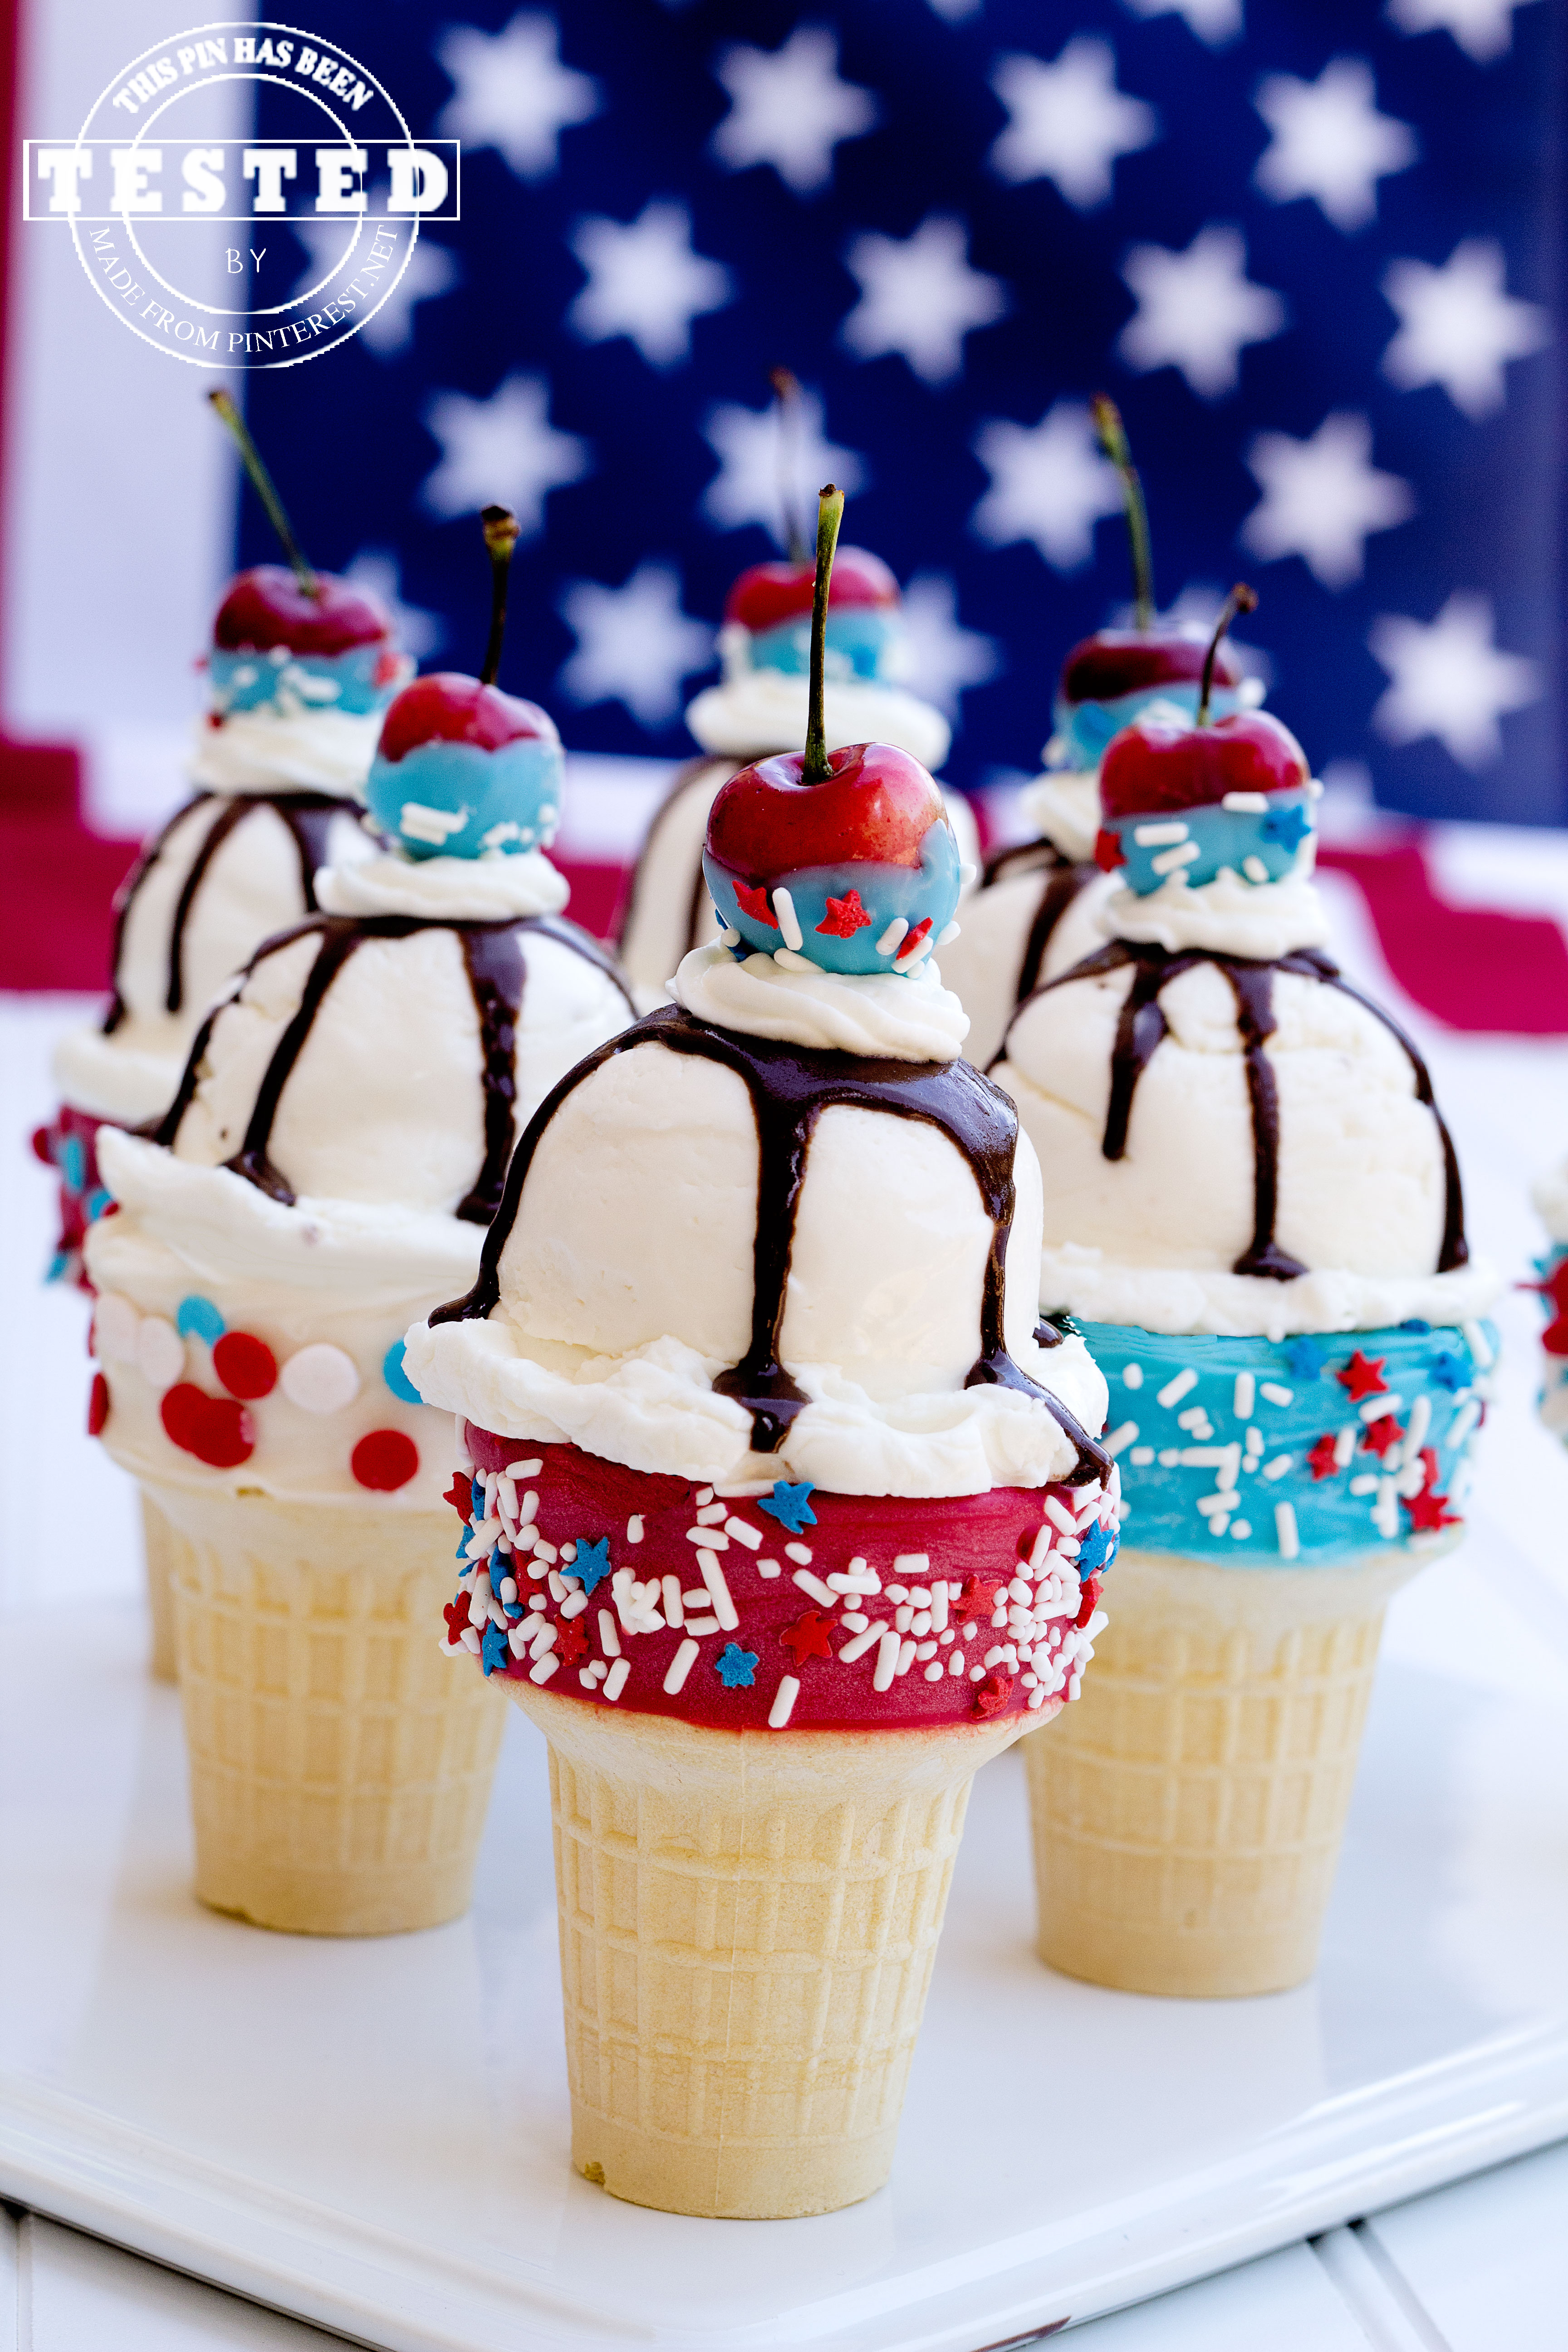 4th July Ice Cream Cones- Quick and easy treat for the 4th of July. Take ordinary ice cream cones and turn them into 4th of July spectacular ice cream cones!   #4th of July #Ice Cream Cones #Ice Cream